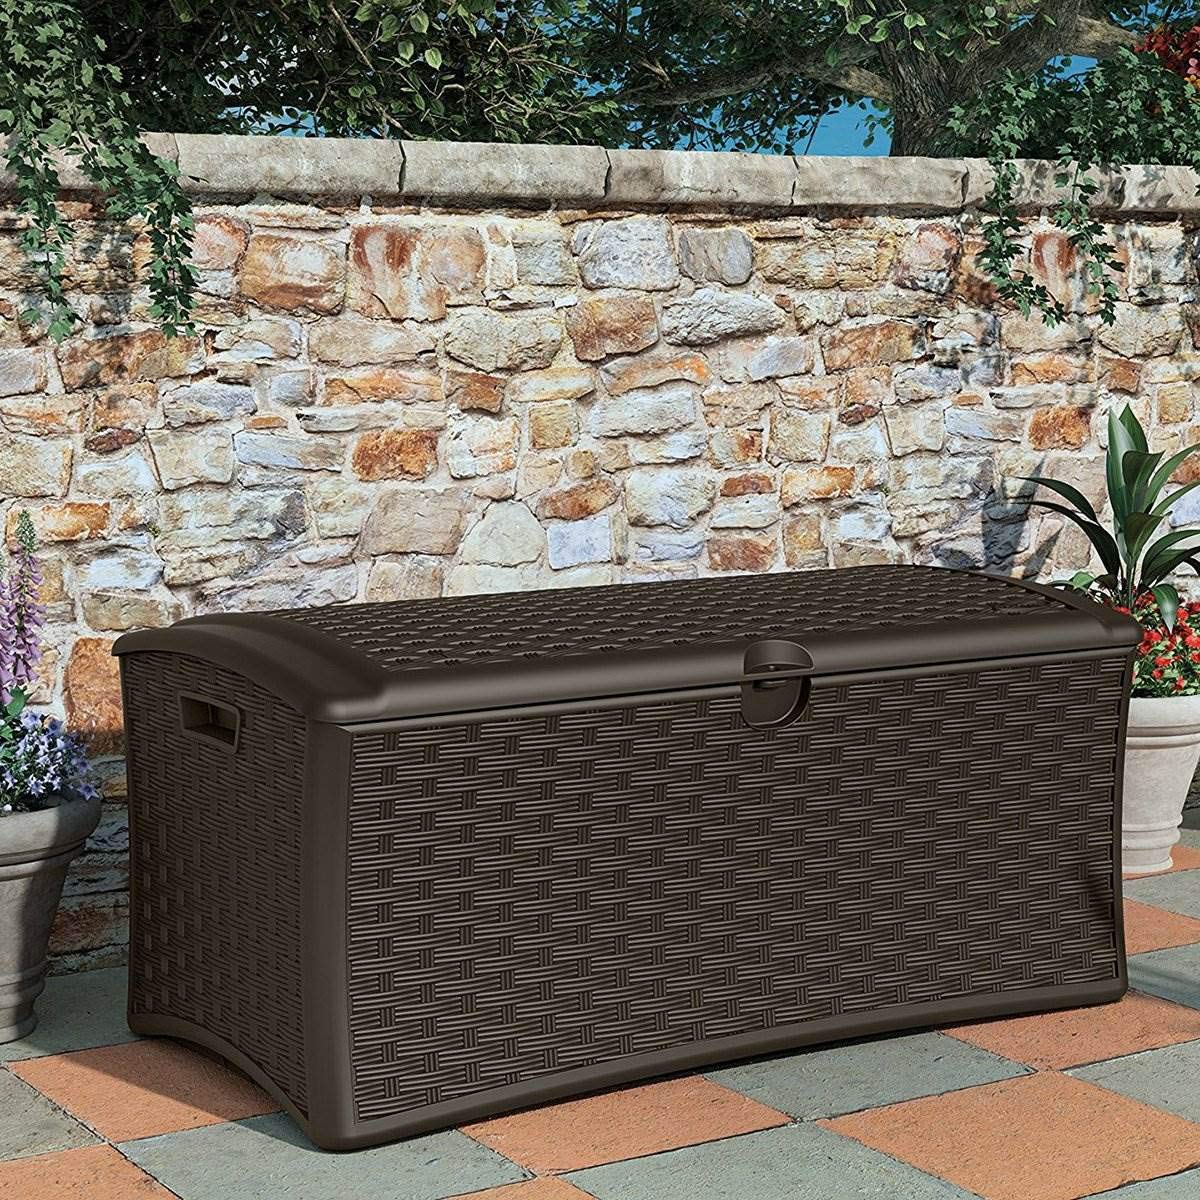 Suncast 72 Gallon Resin Wicker Outdoor Patio Storage Deck Box, Brown (4 Pack) 72 gallon - 4 Pack